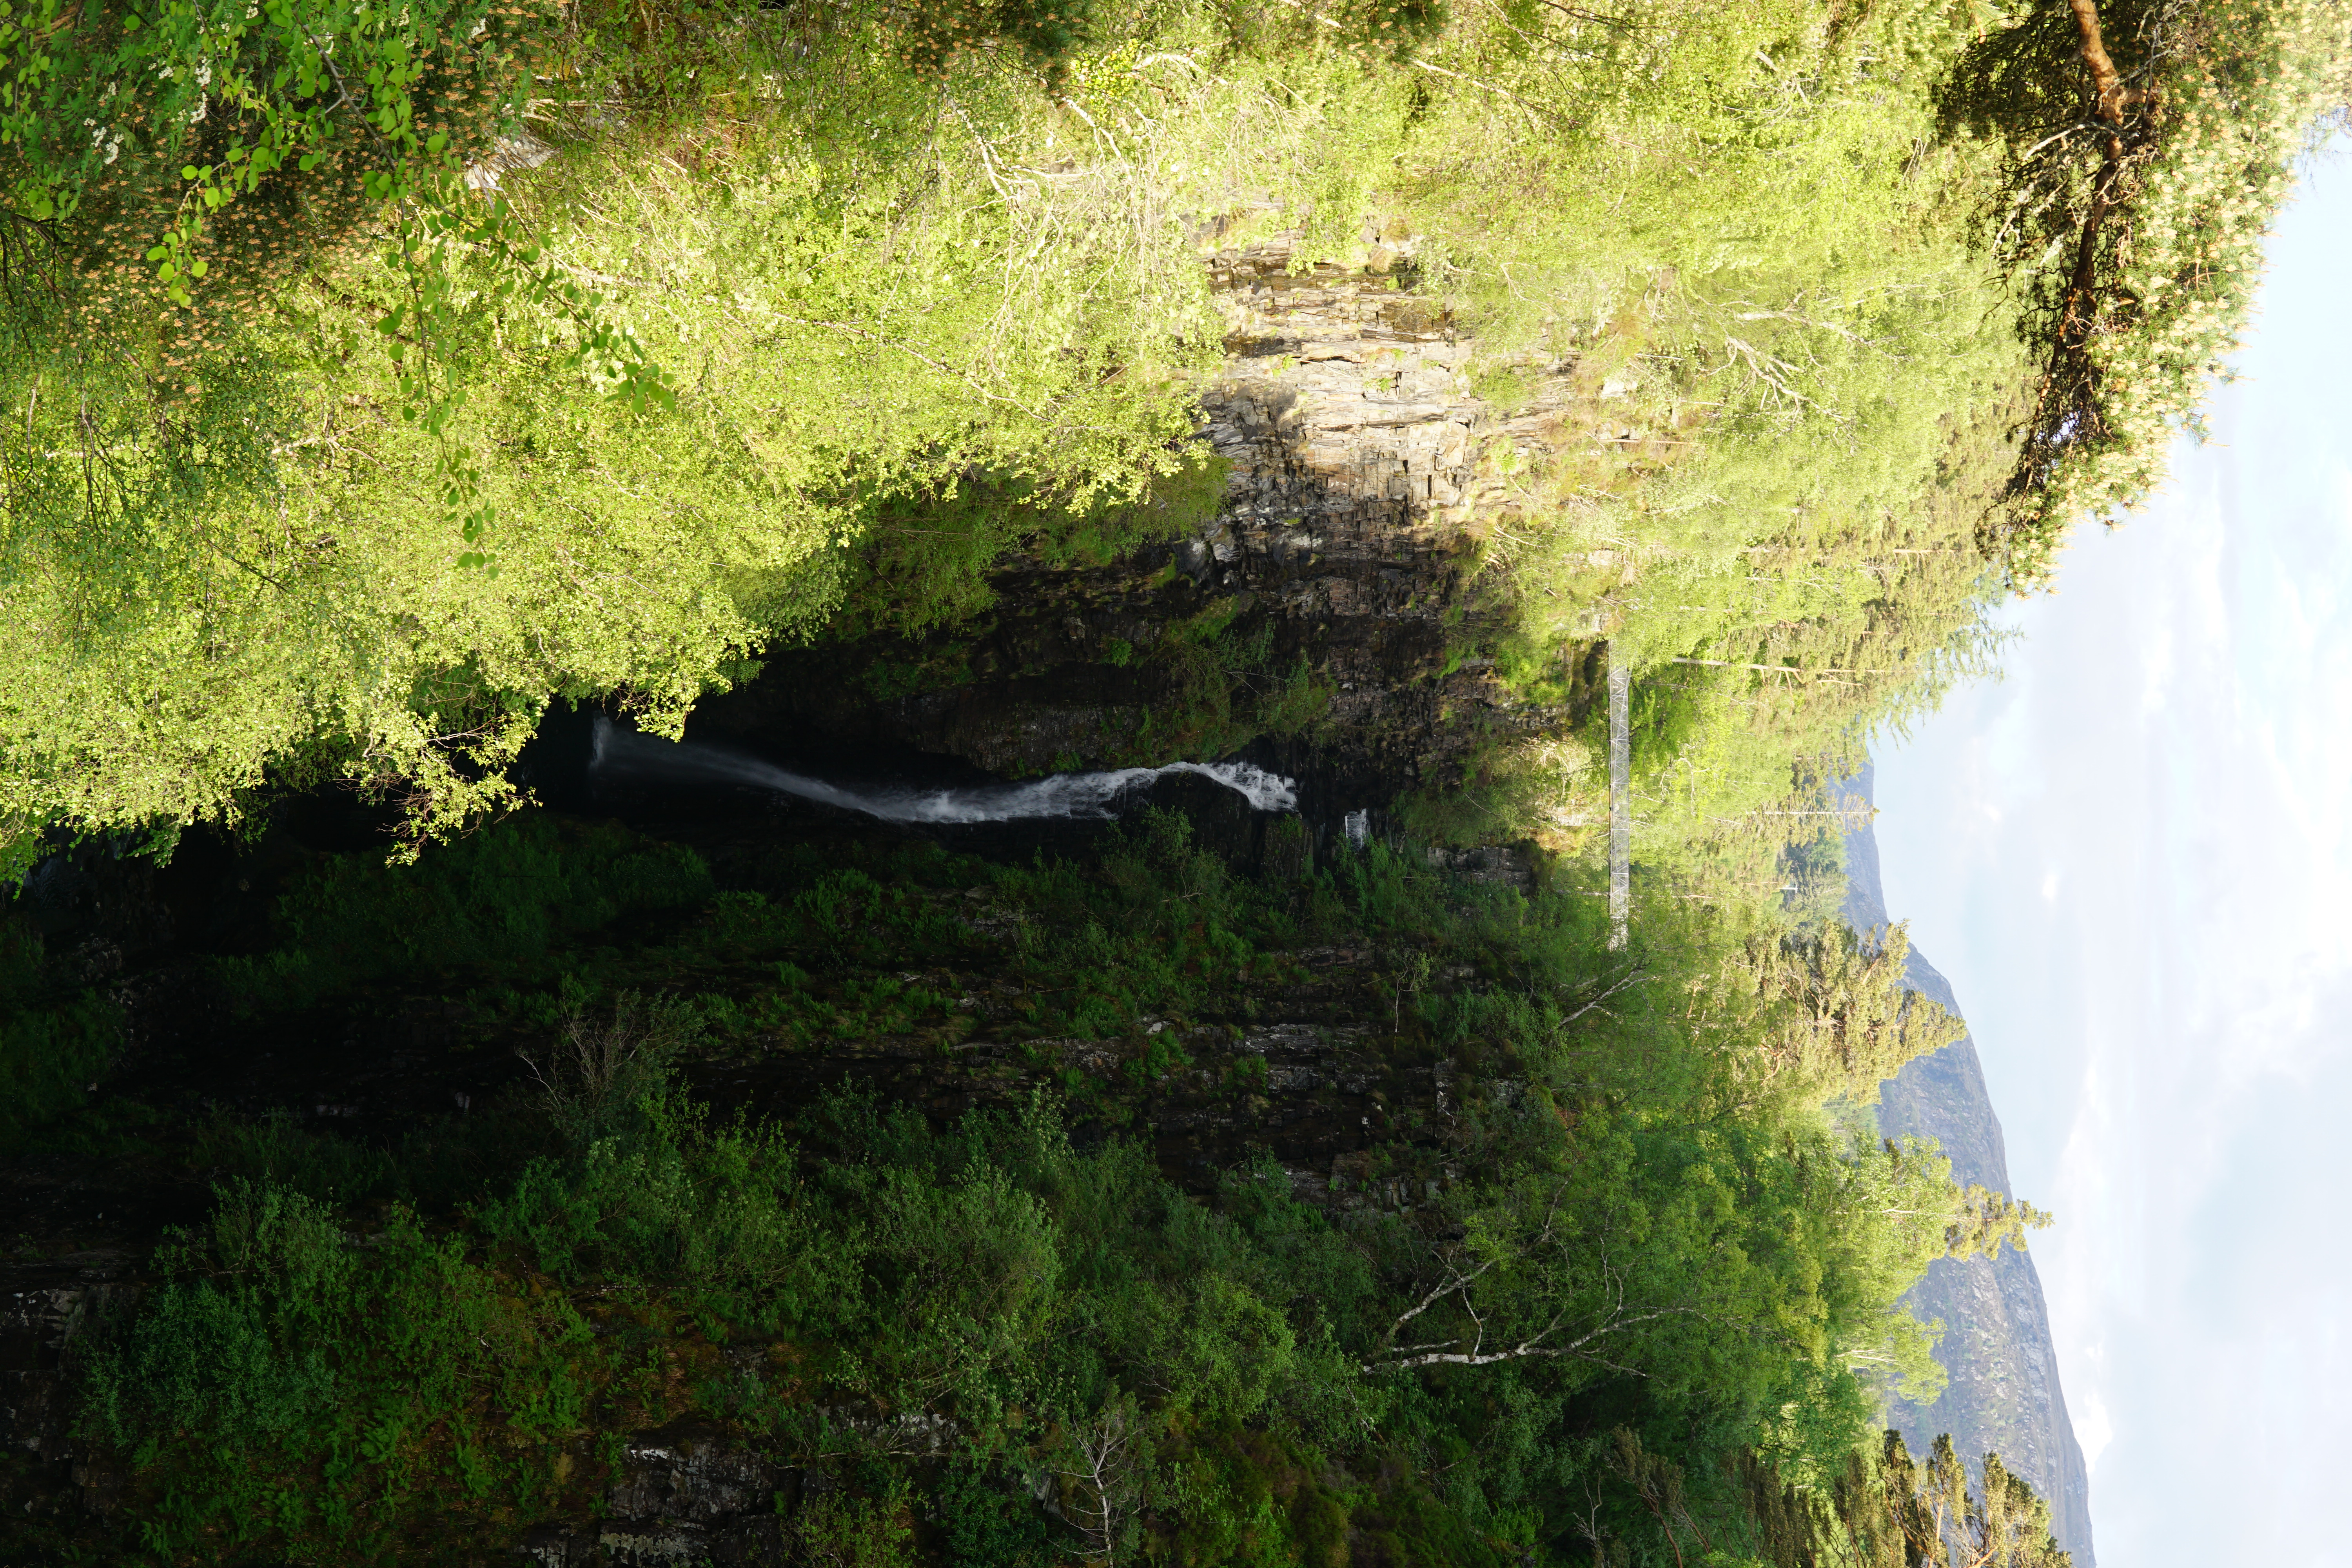 A view of the Corrieshalloch Gorge and Waterfall from the designated viewing platform